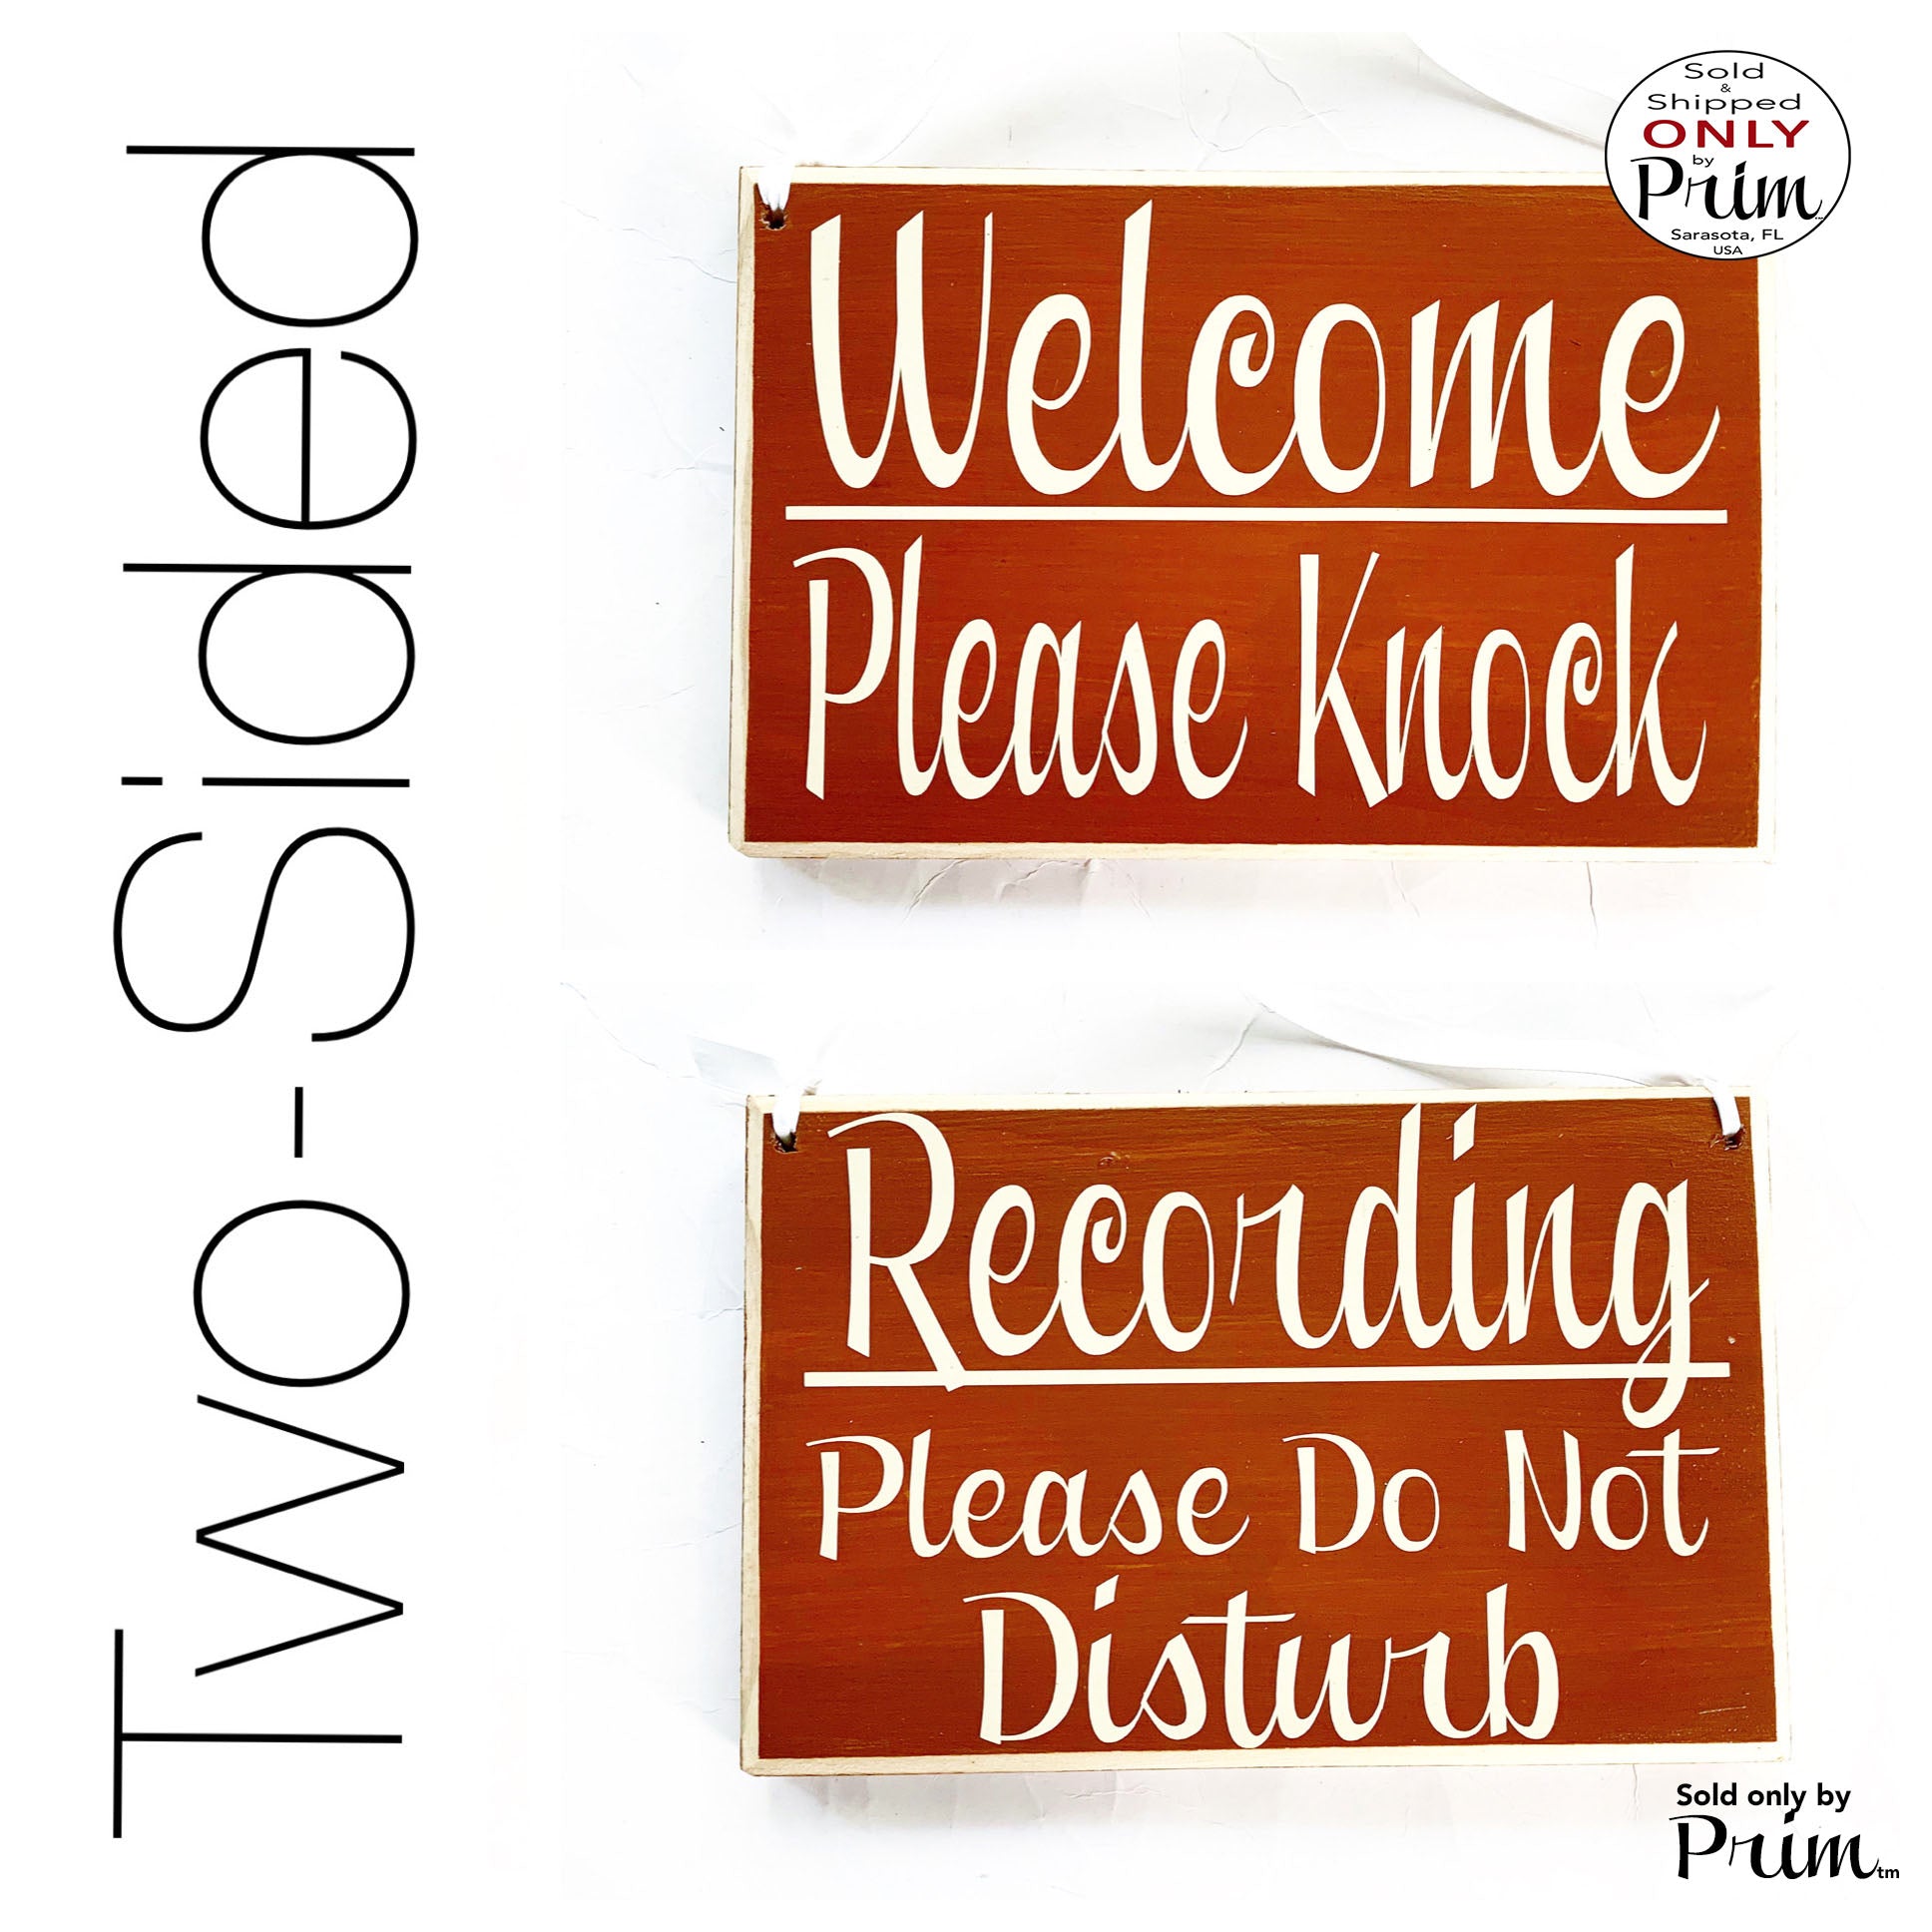 Two Sided 8x6 Recording Please Do Not Disturb Welcome Please Knock Custom Wood Sign Podcast Studio Radio News Broadcast Office Door Plaque Designs by Prim